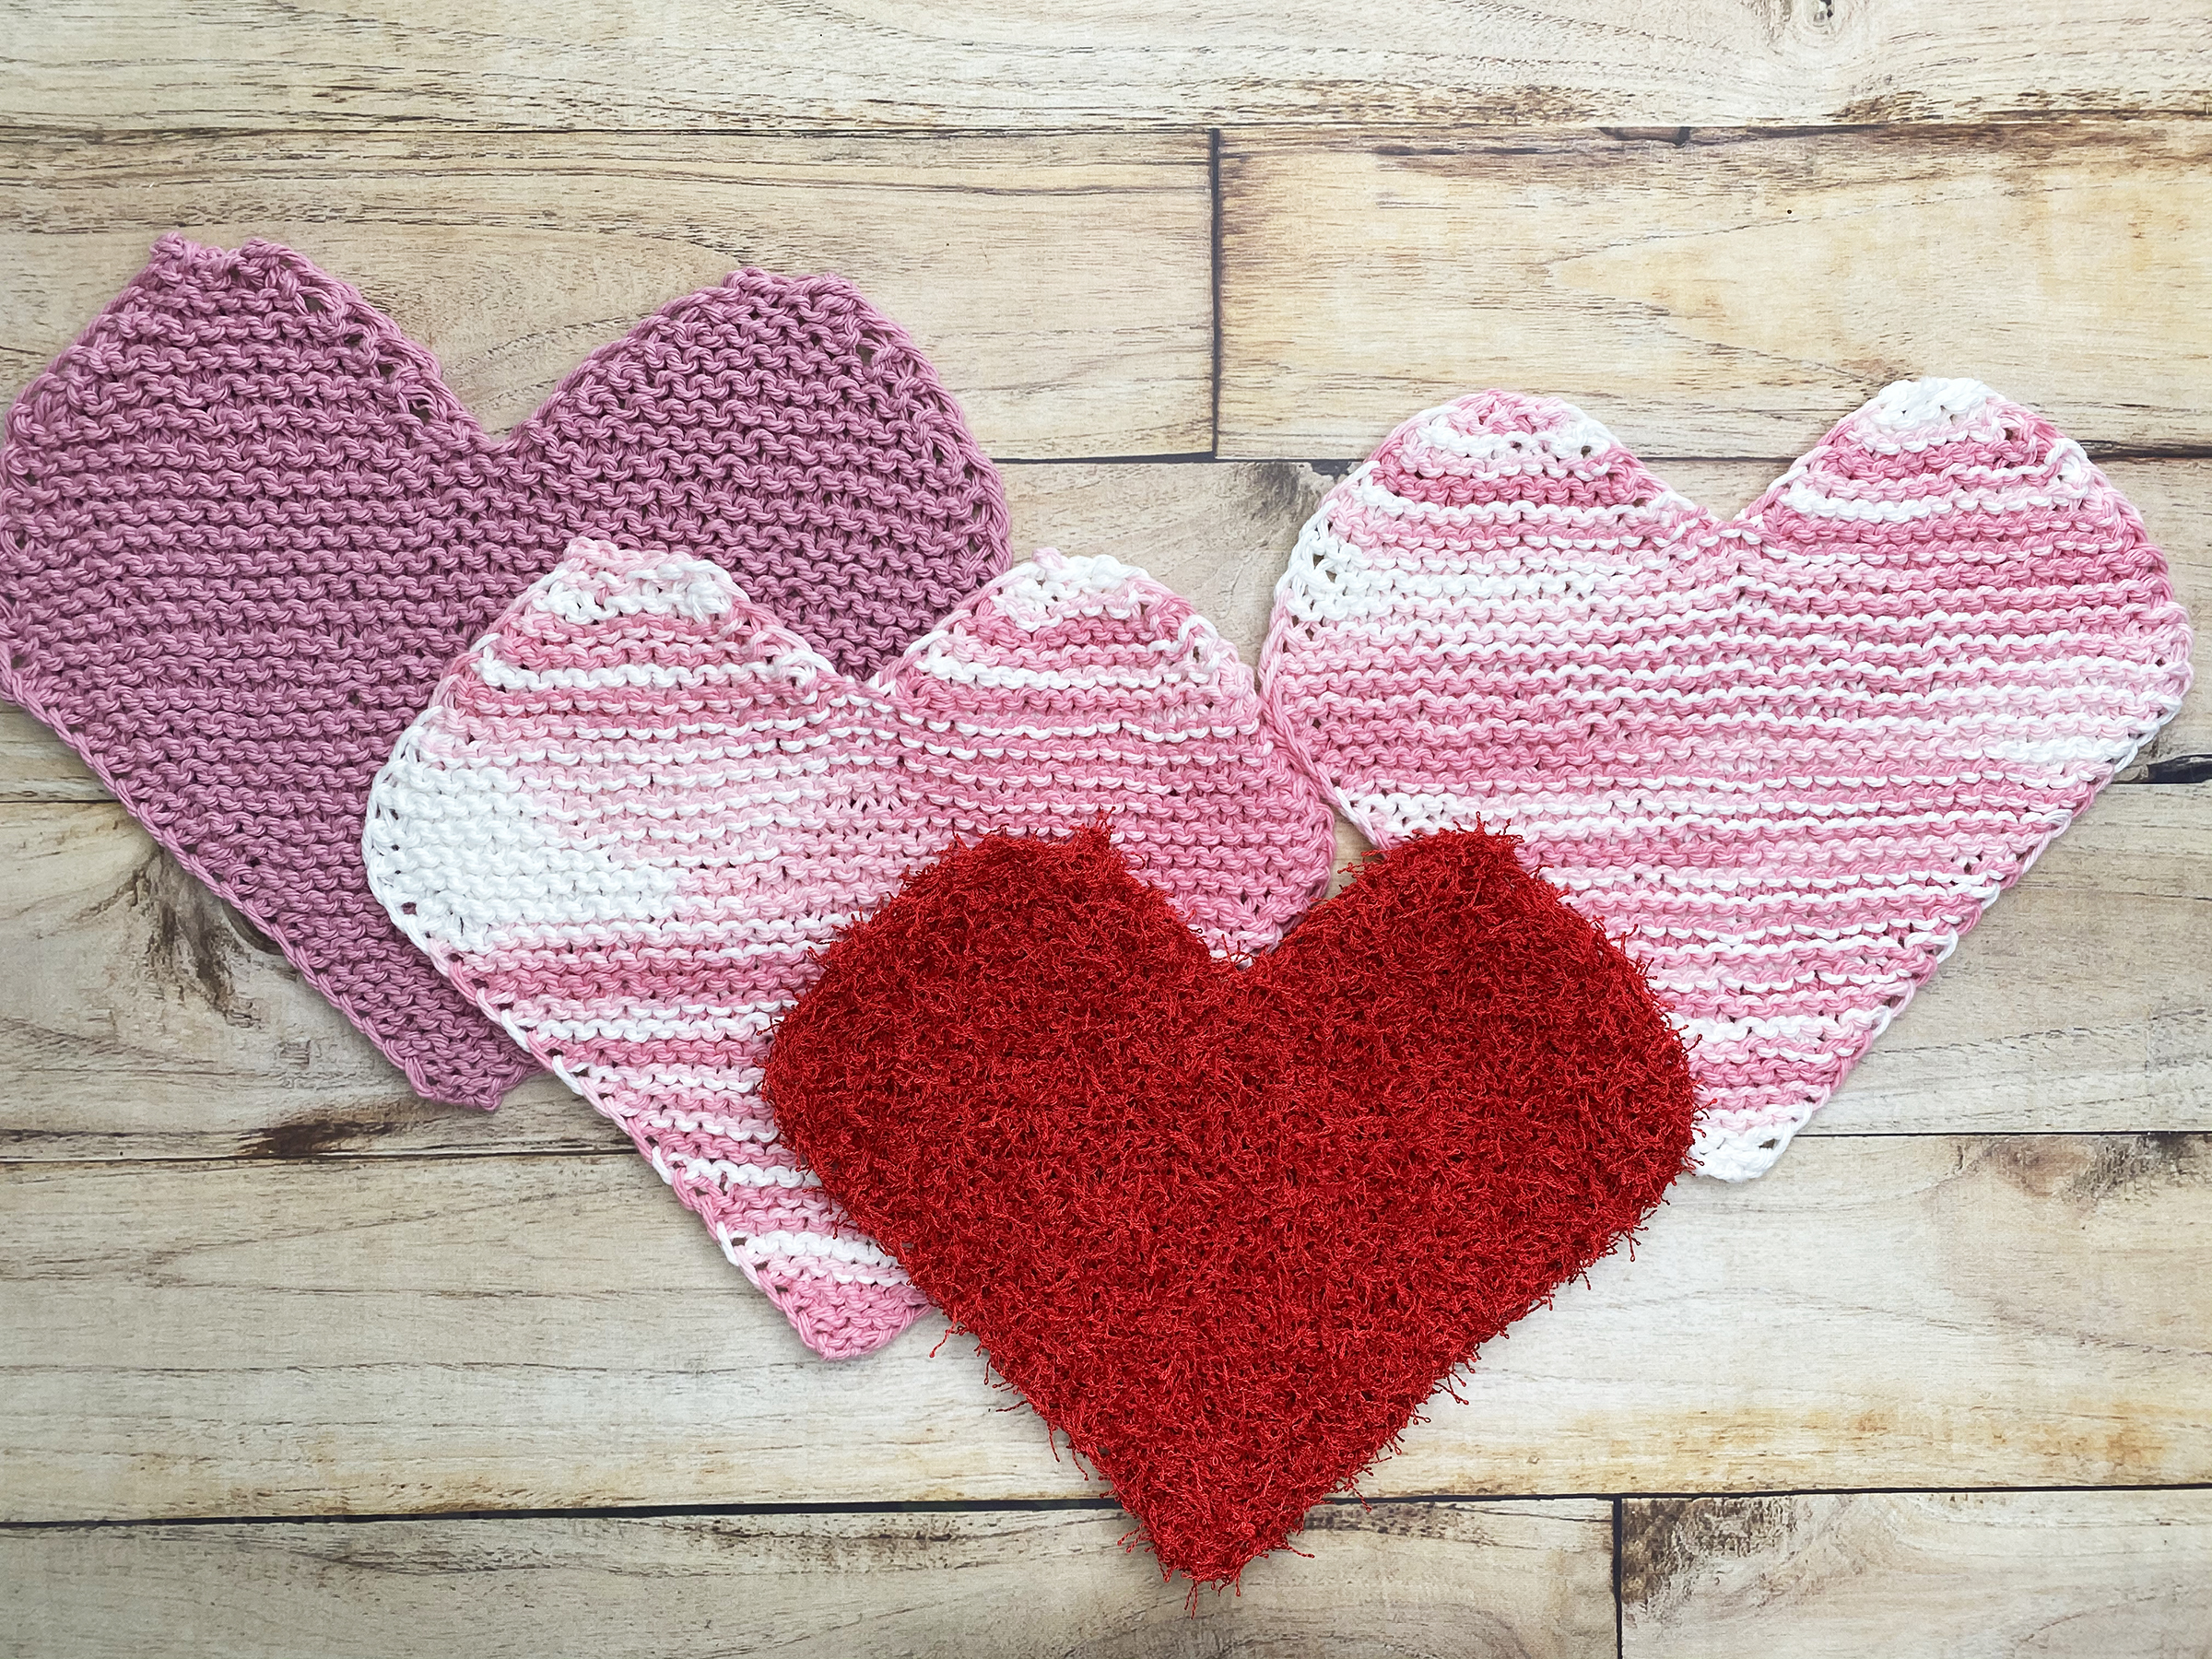 How to knit a heart shape for beginners - Easy step by step